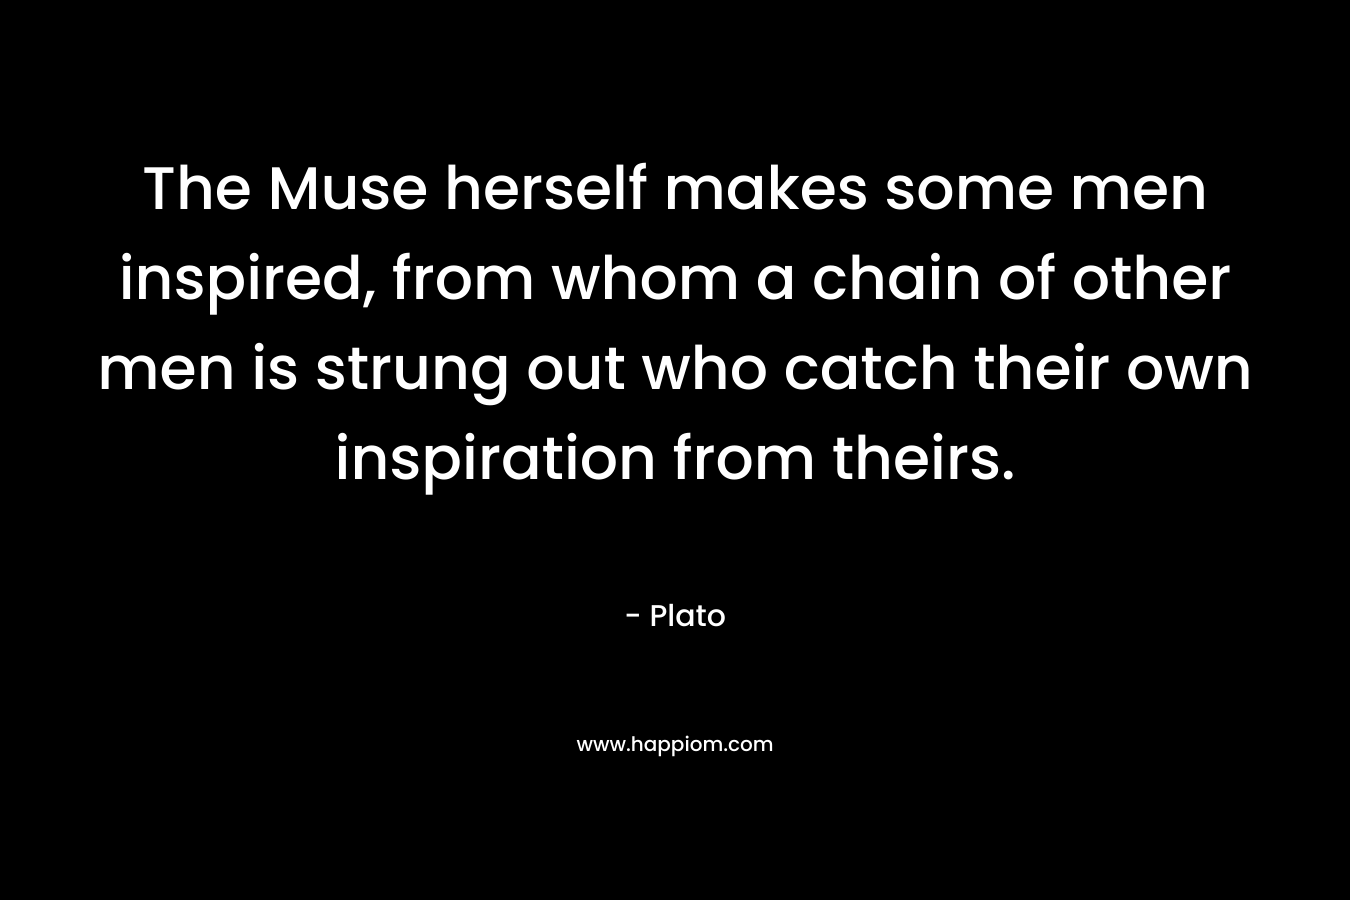 The Muse herself makes some men inspired, from whom a chain of other men is strung out who catch their own inspiration from theirs.